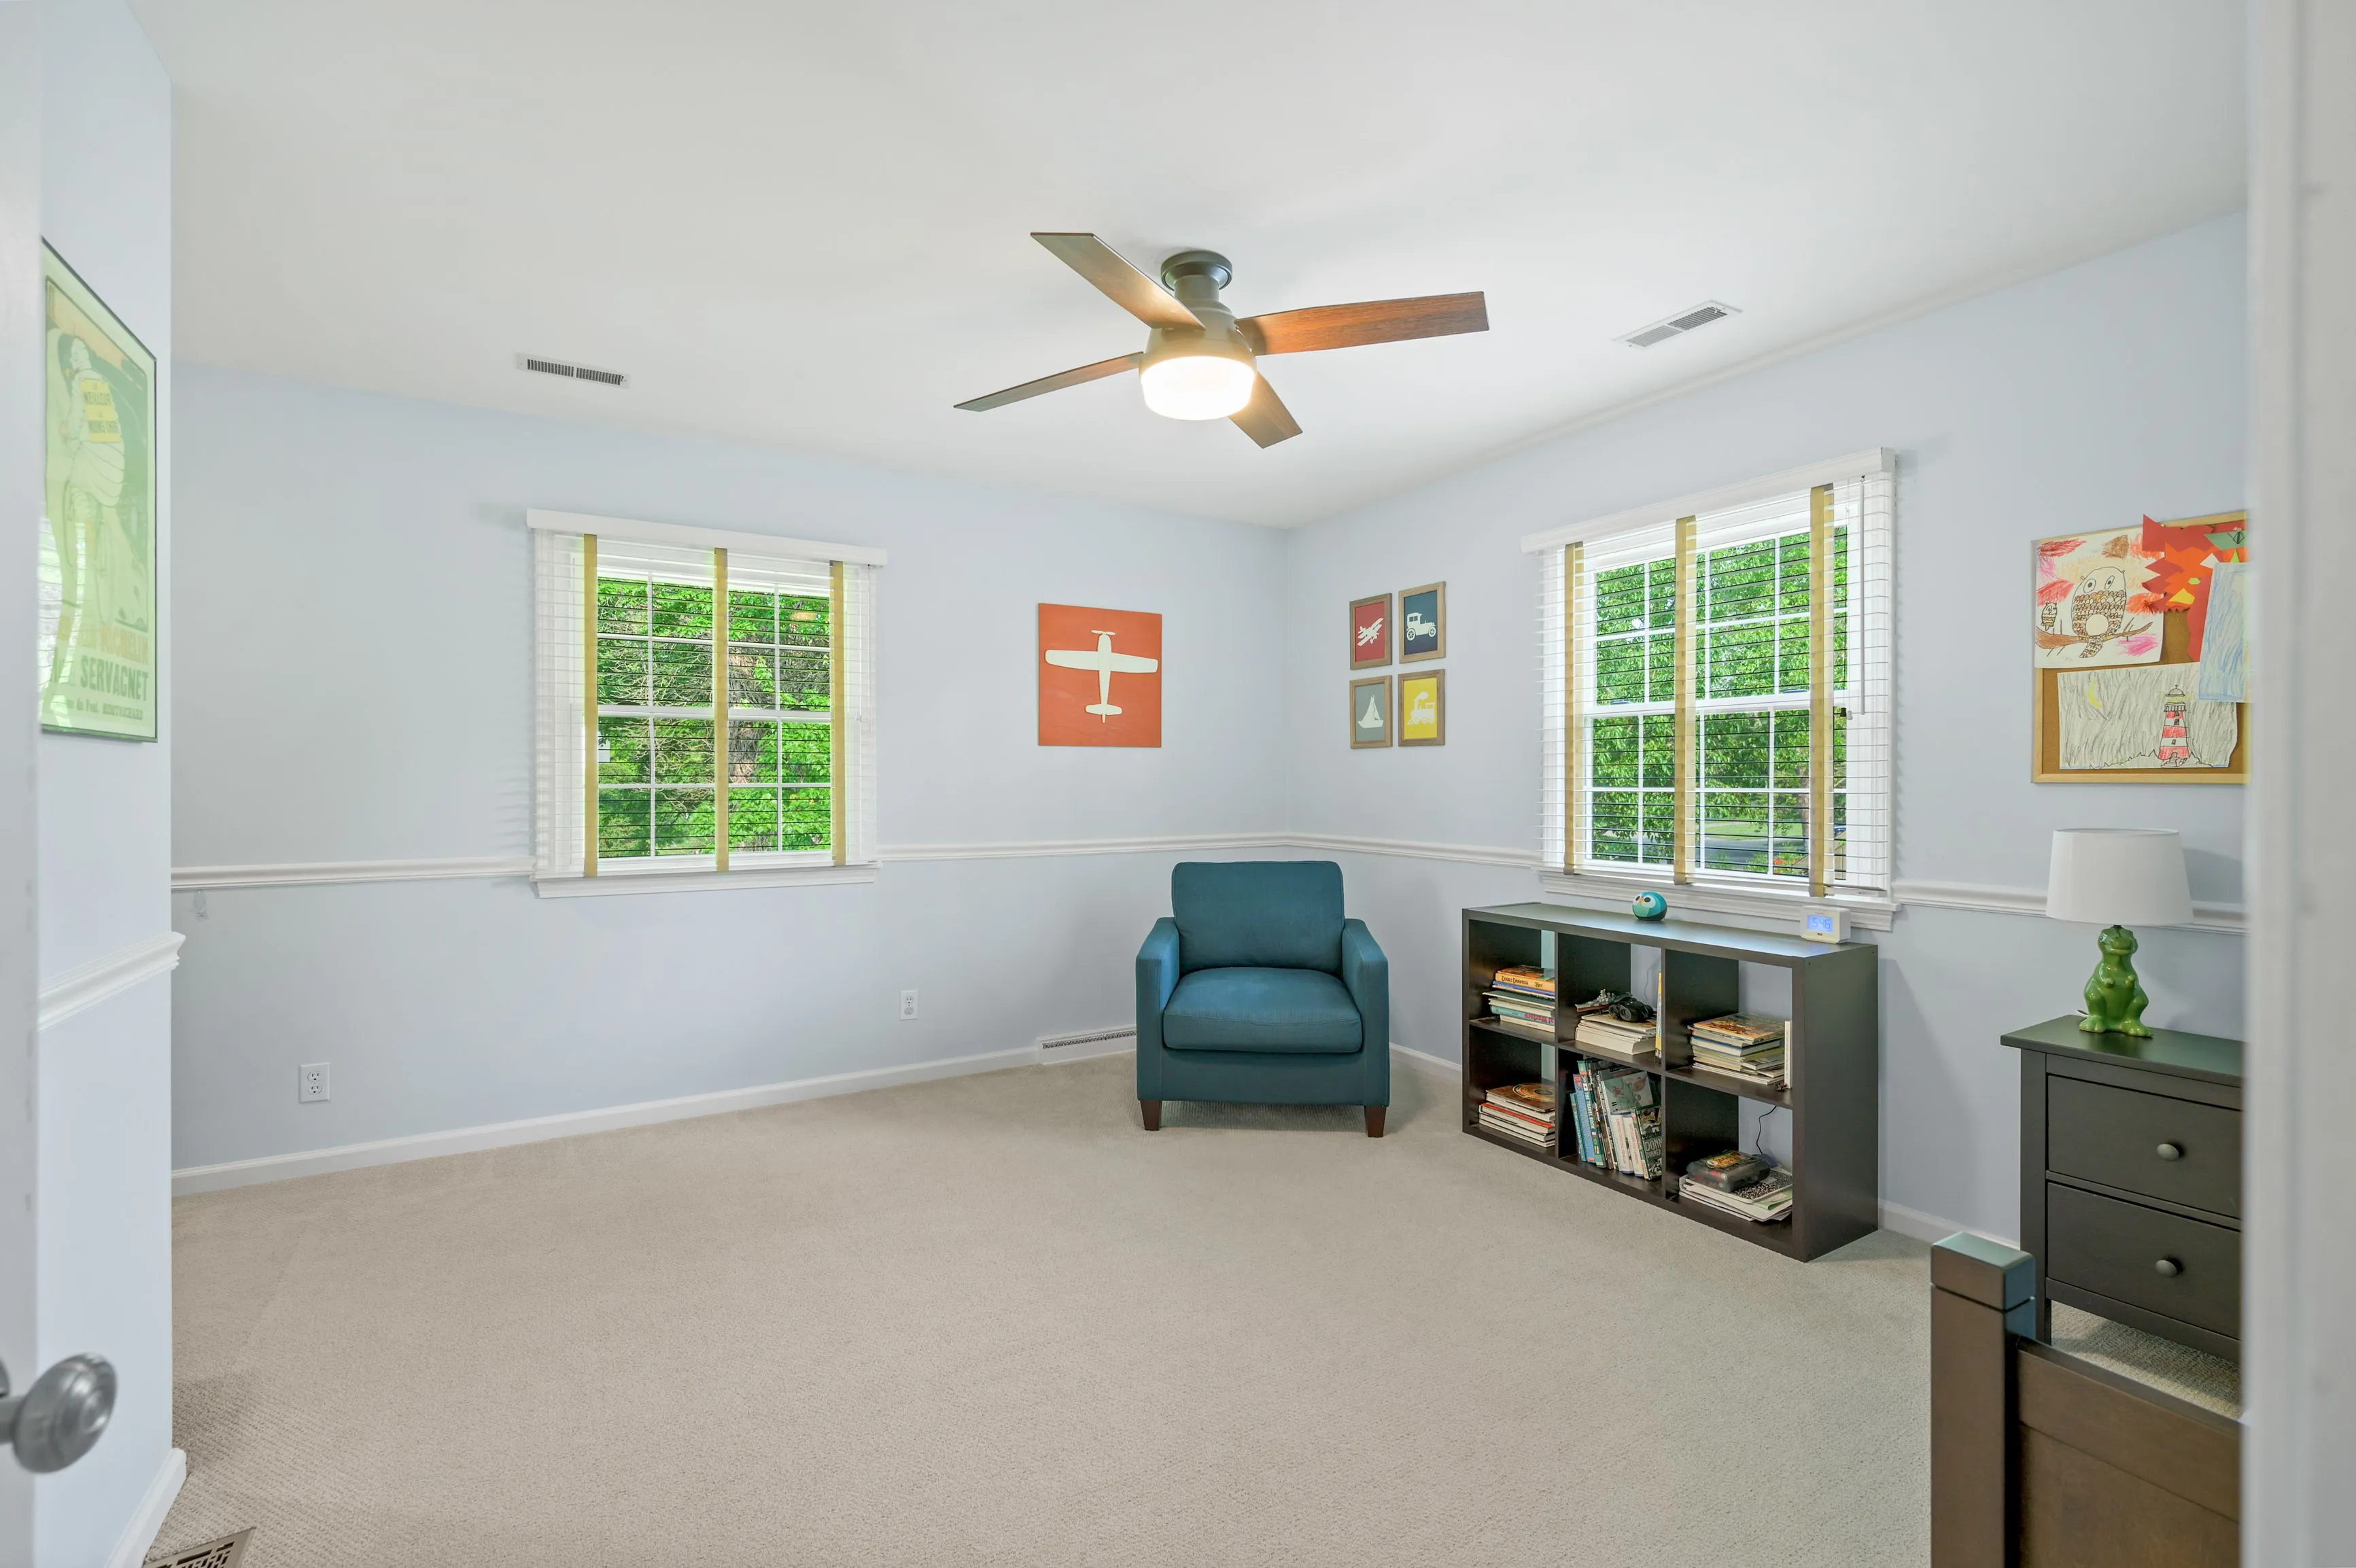 Bright empty room with beige carpet, one blue armchair, ceiling fan, and office shelves by the window with greenery outside.